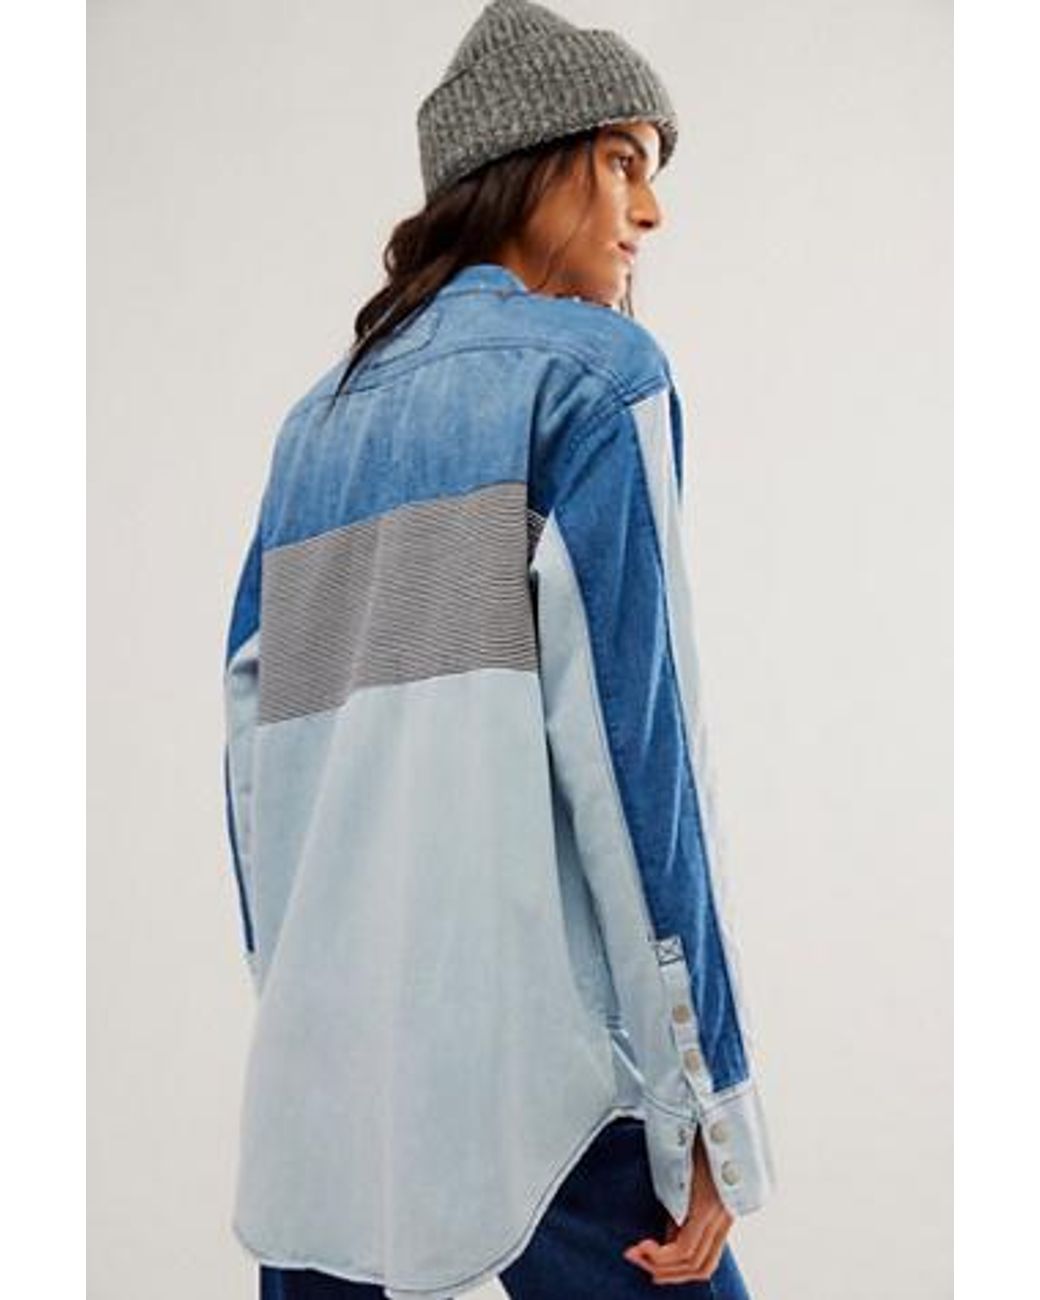 Free People Moto Colorblock Shirt At Free People In Blue Combo